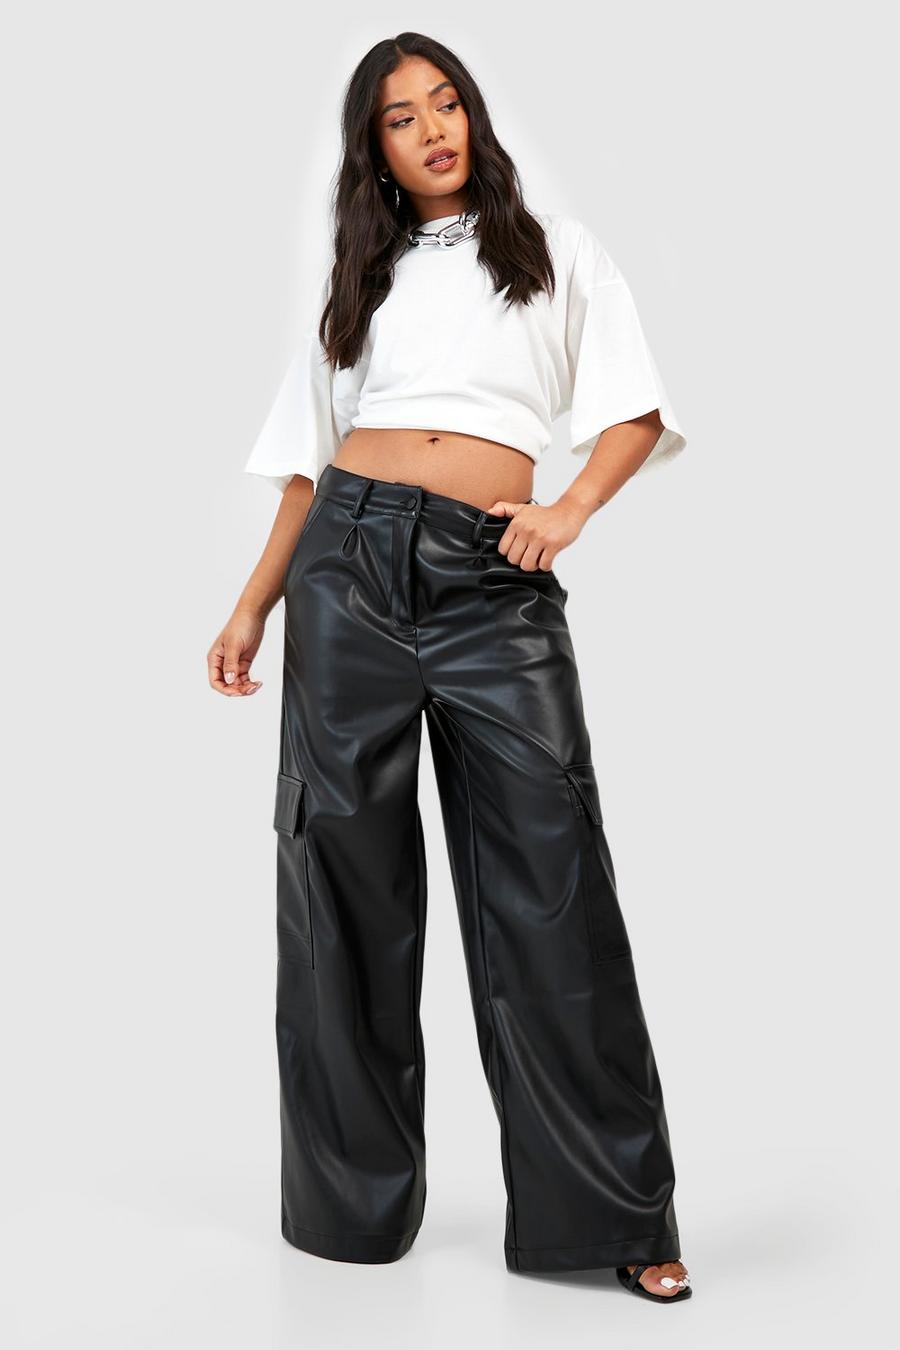 Black Petite Leather Look High Waisted Cargo Pants